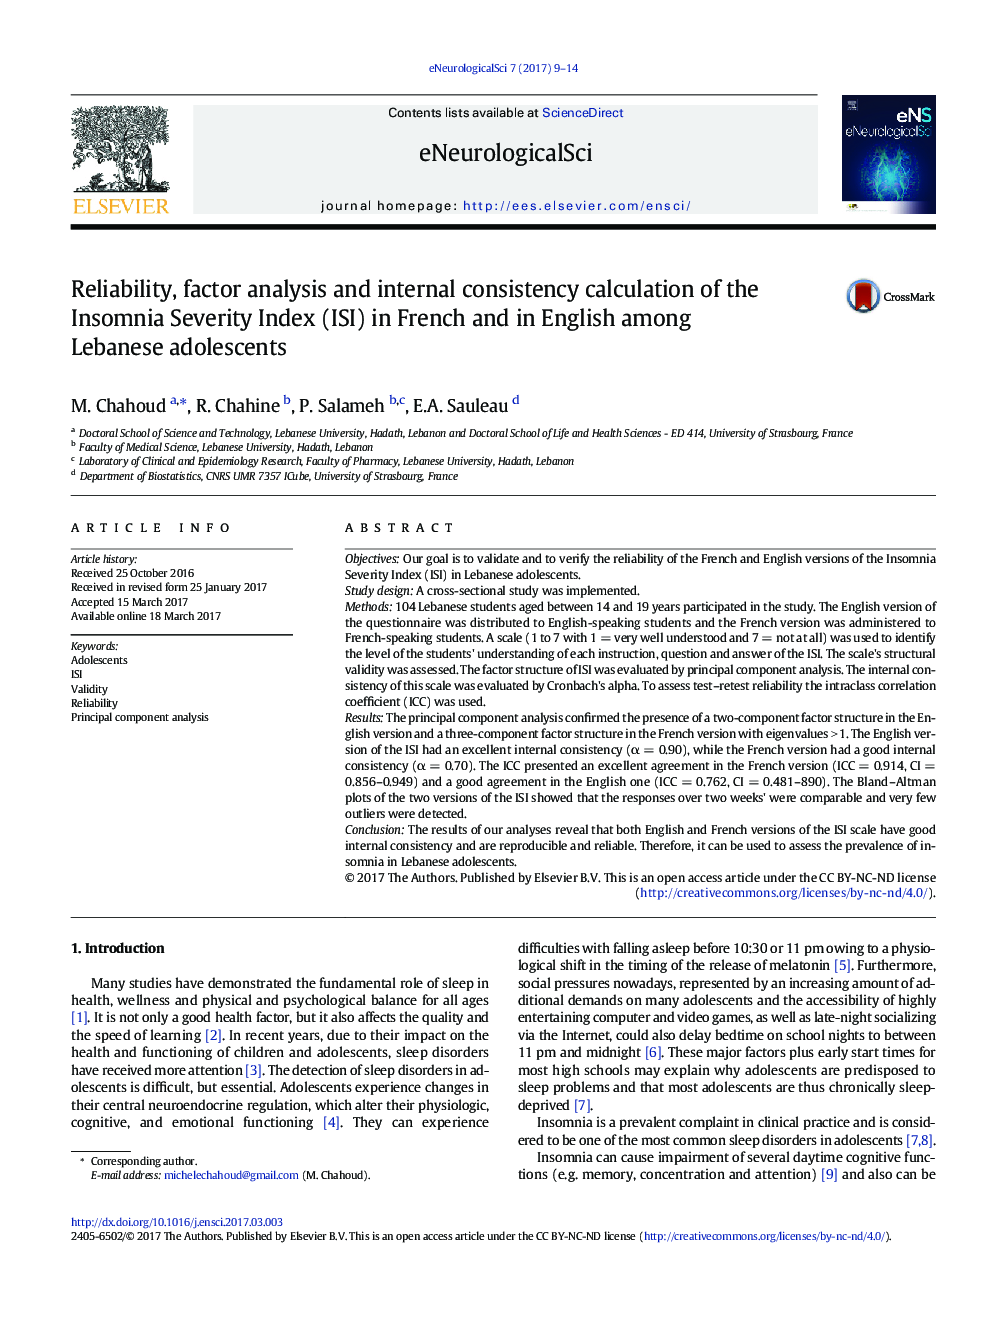 Reliability, factor analysis and internal consistency calculation of the Insomnia Severity Index (ISI) in French and in English among Lebanese adolescents